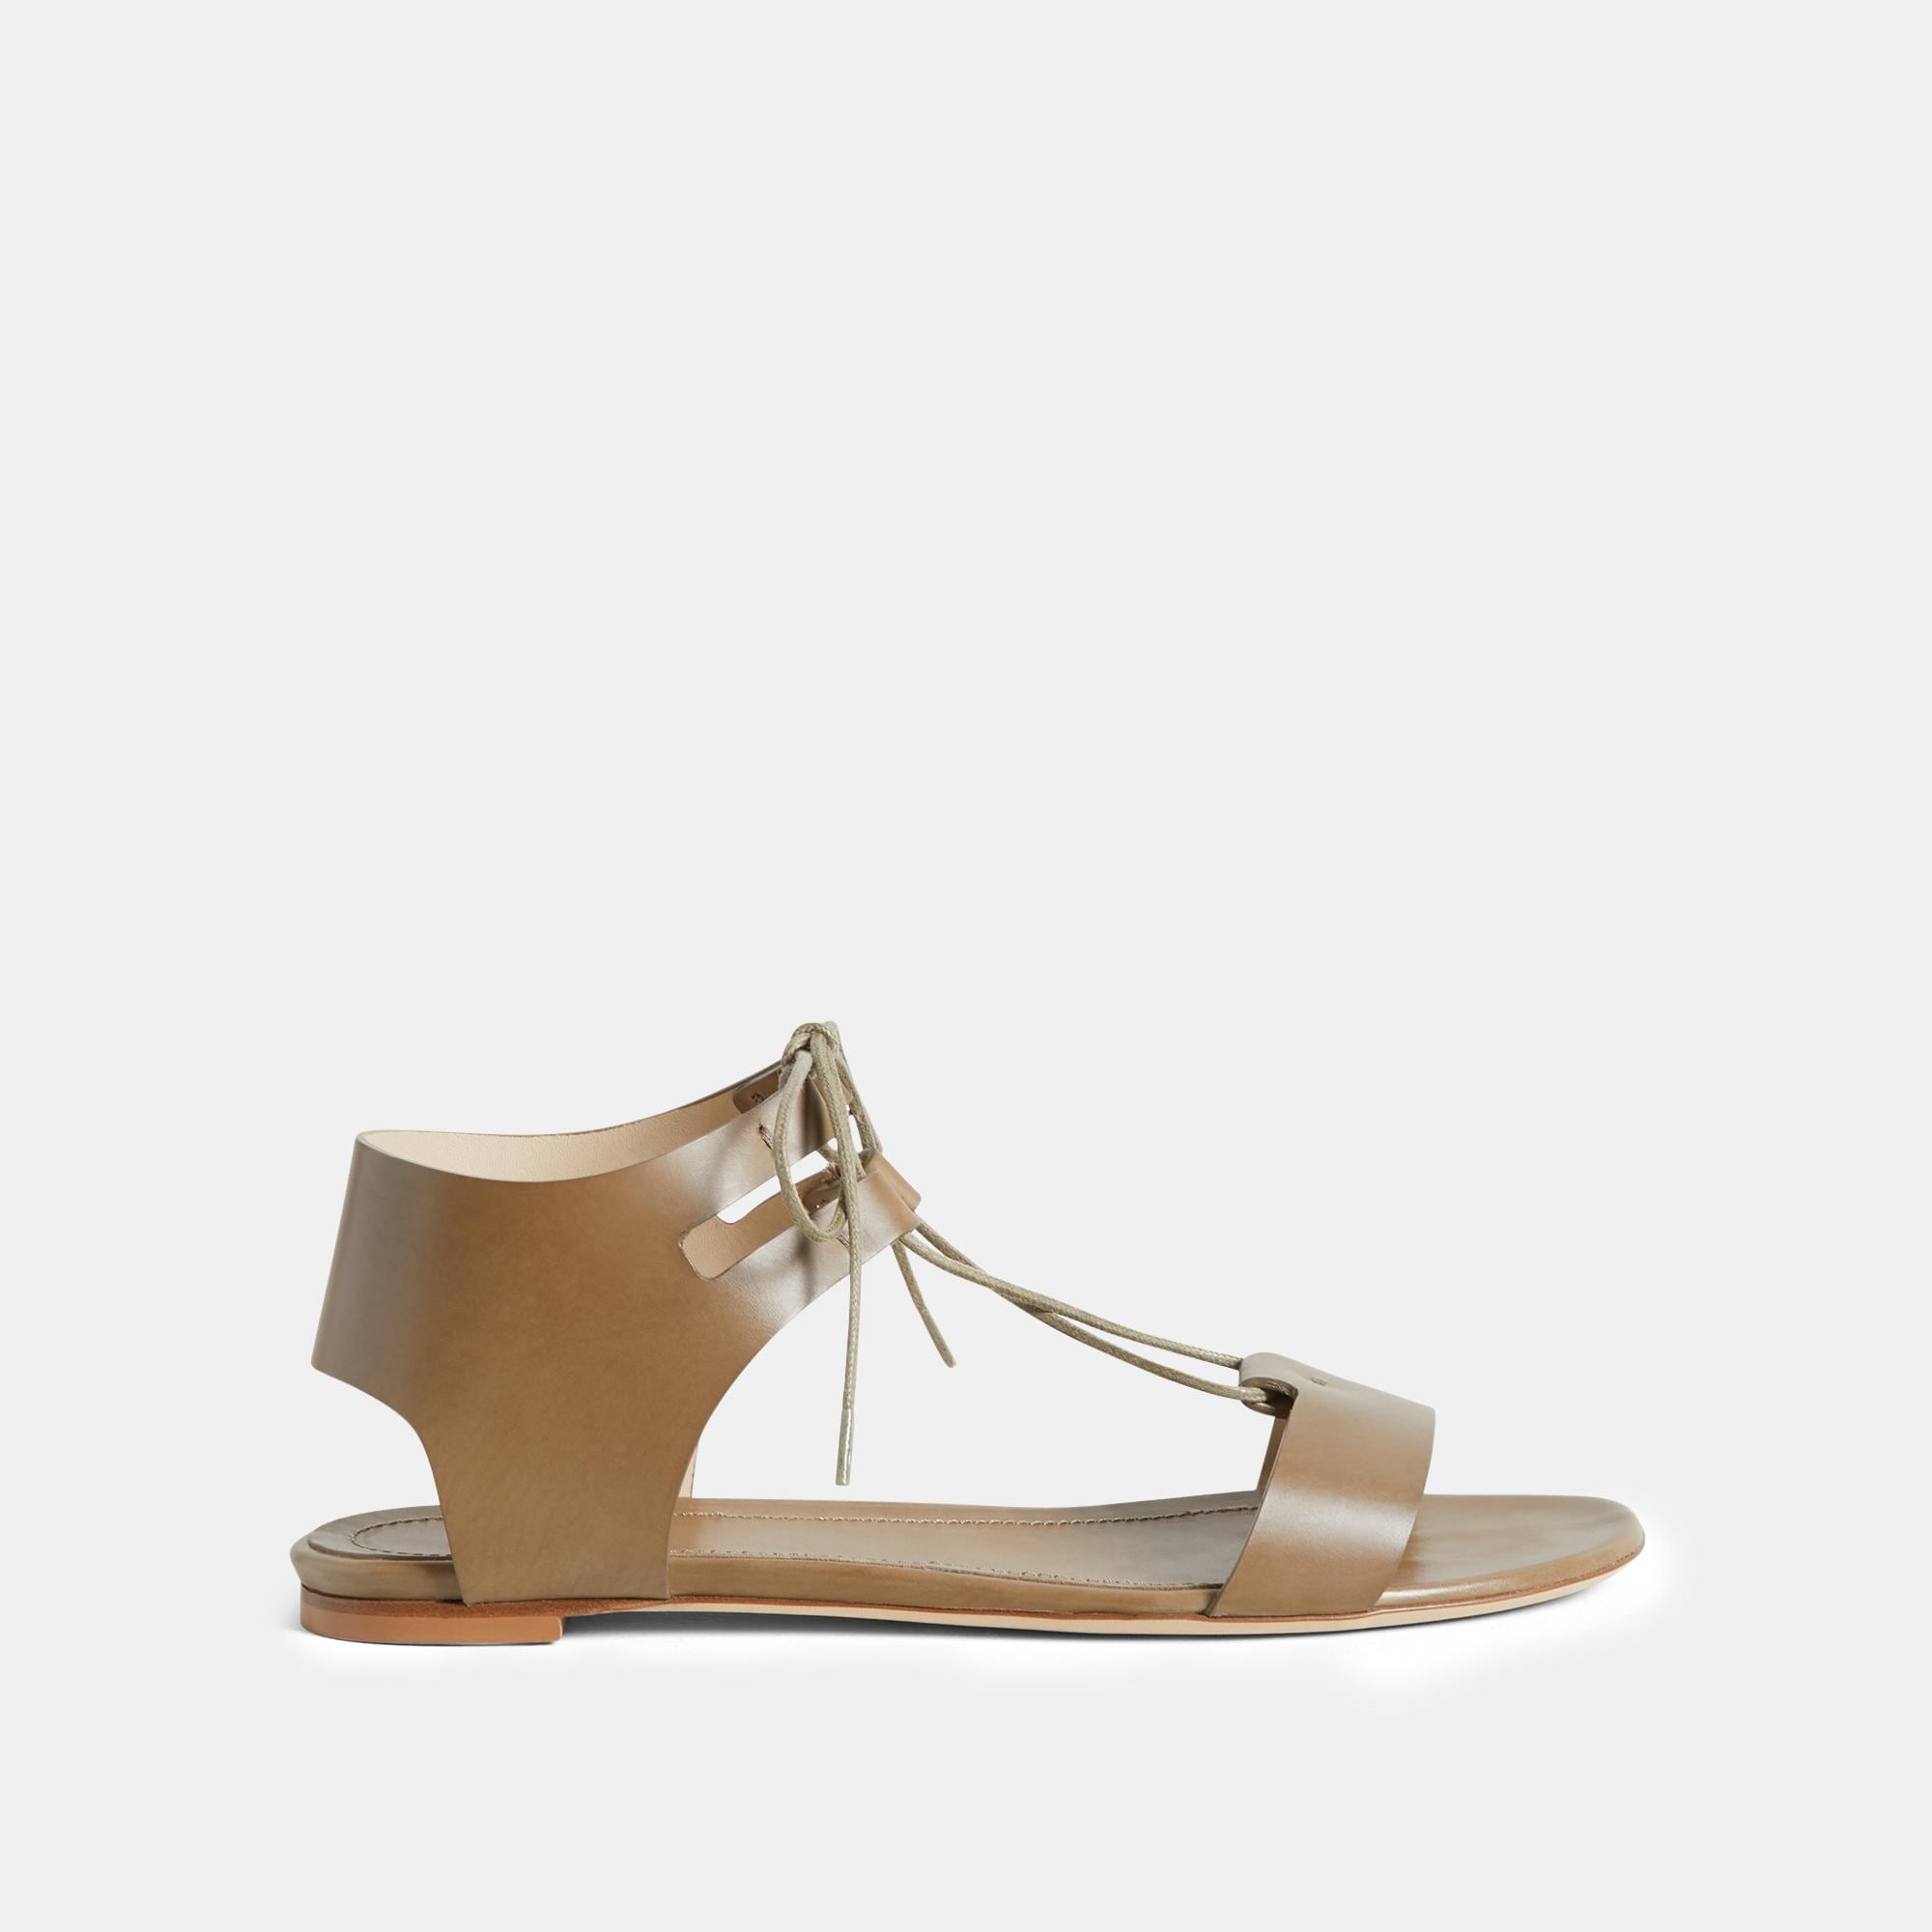 Theory Laced Sandal in Leather